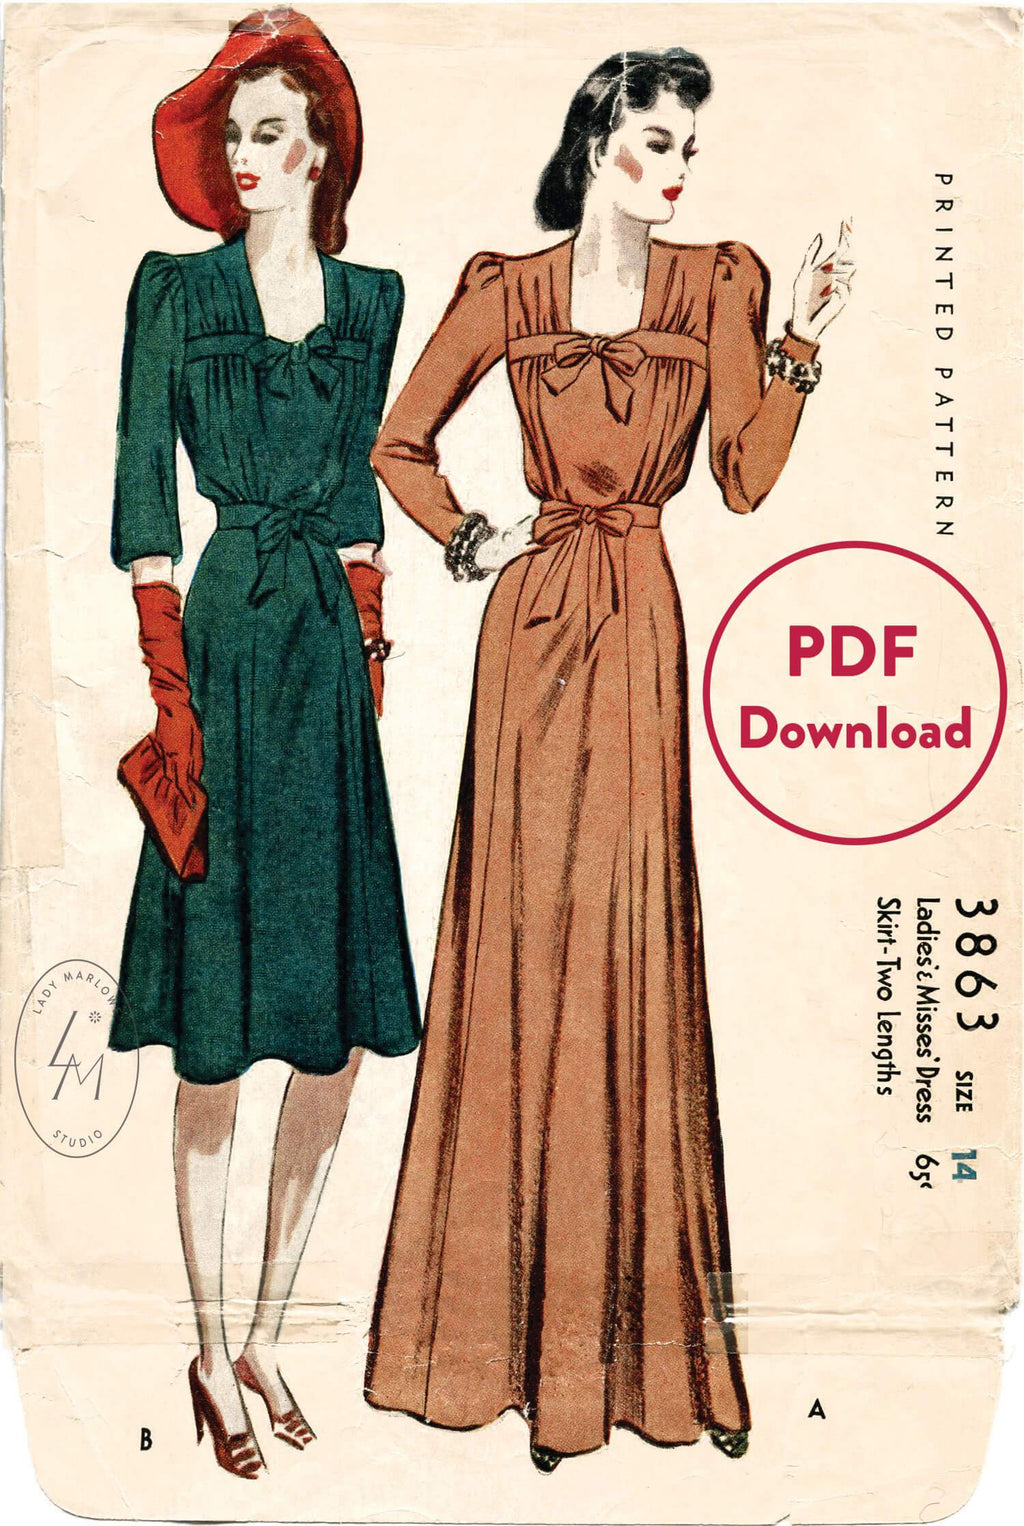 McCall 3863 1940s vintage sewing pattern 1940 40s dress evening gown PDF download